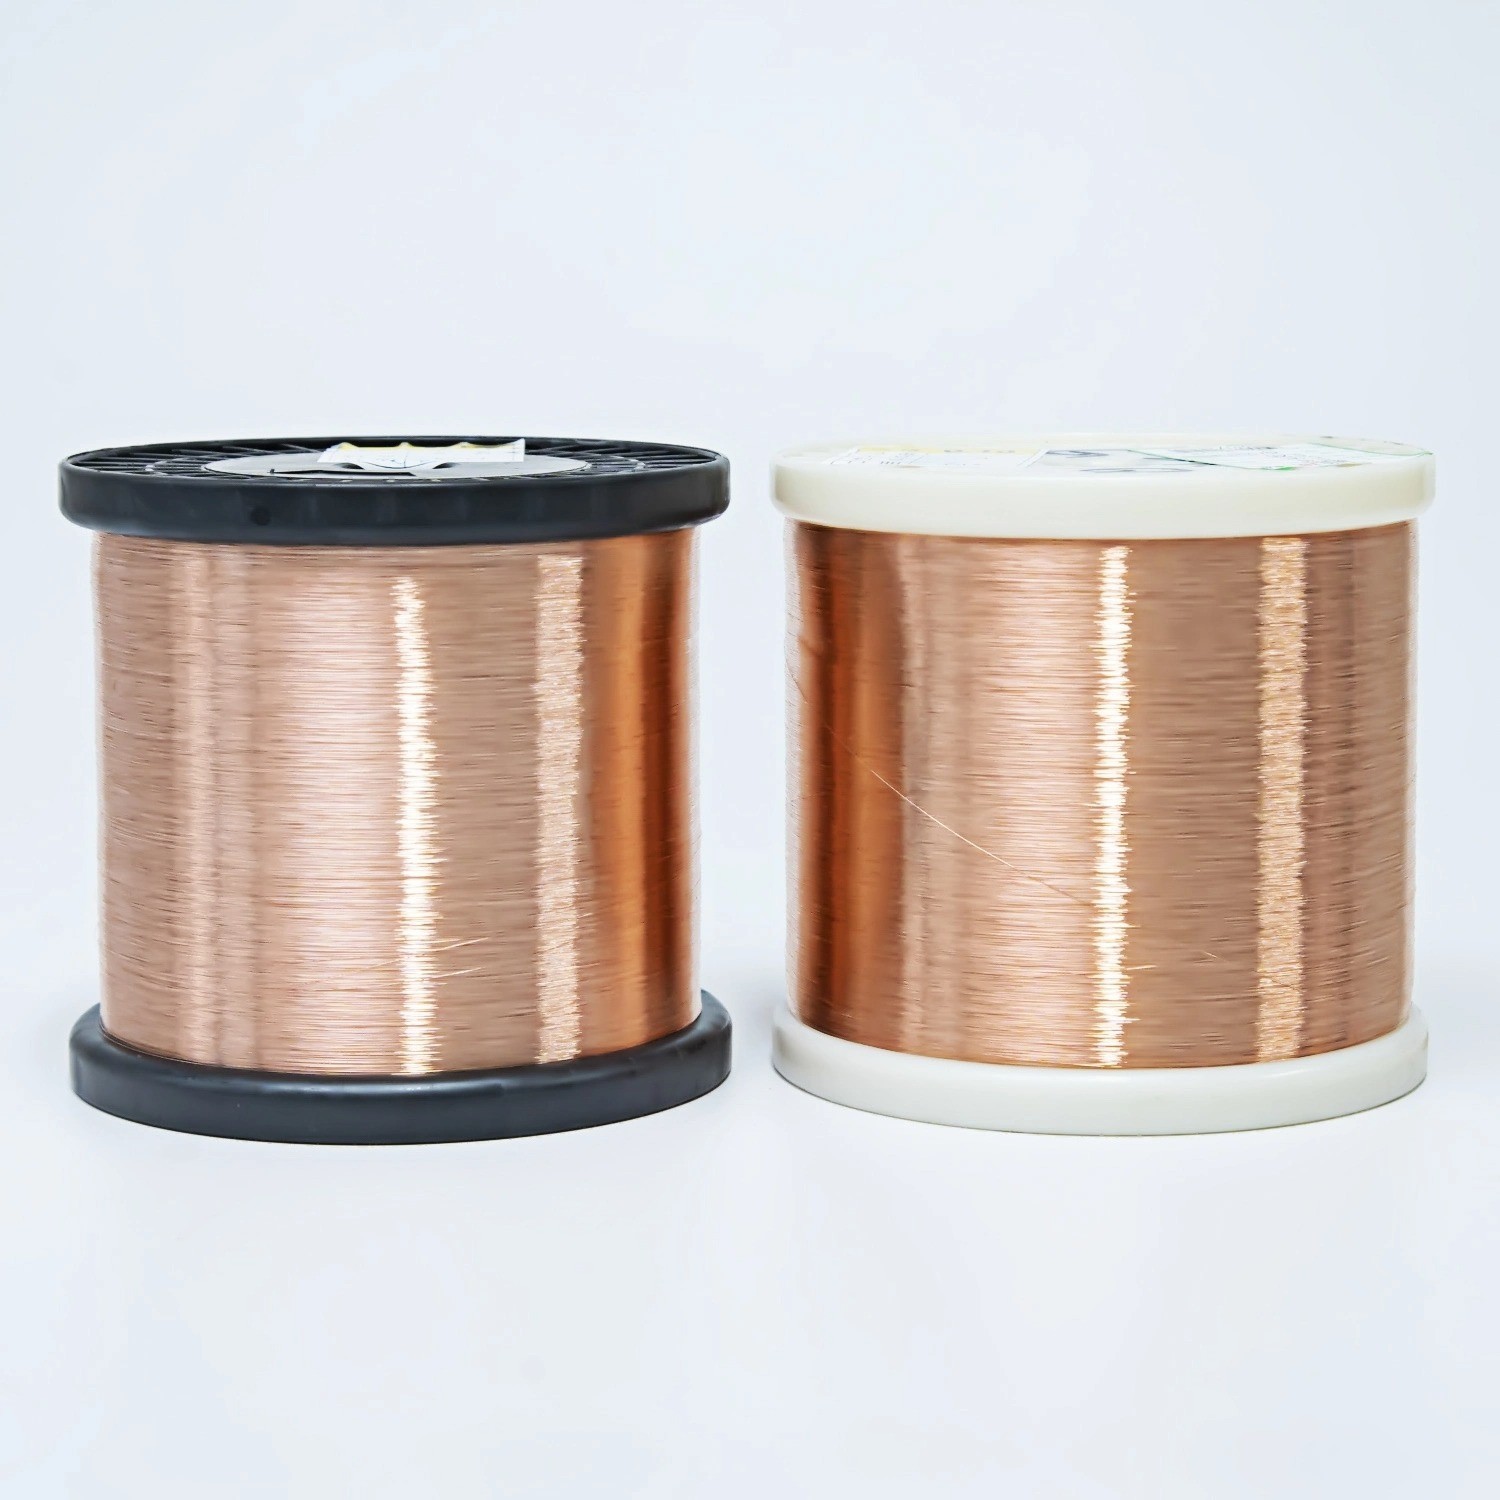 Quality Er70s-6 Mild Steel Mig Welding Wire Spool .030 44lb 33 Lbs Copper Metal Wire for sale